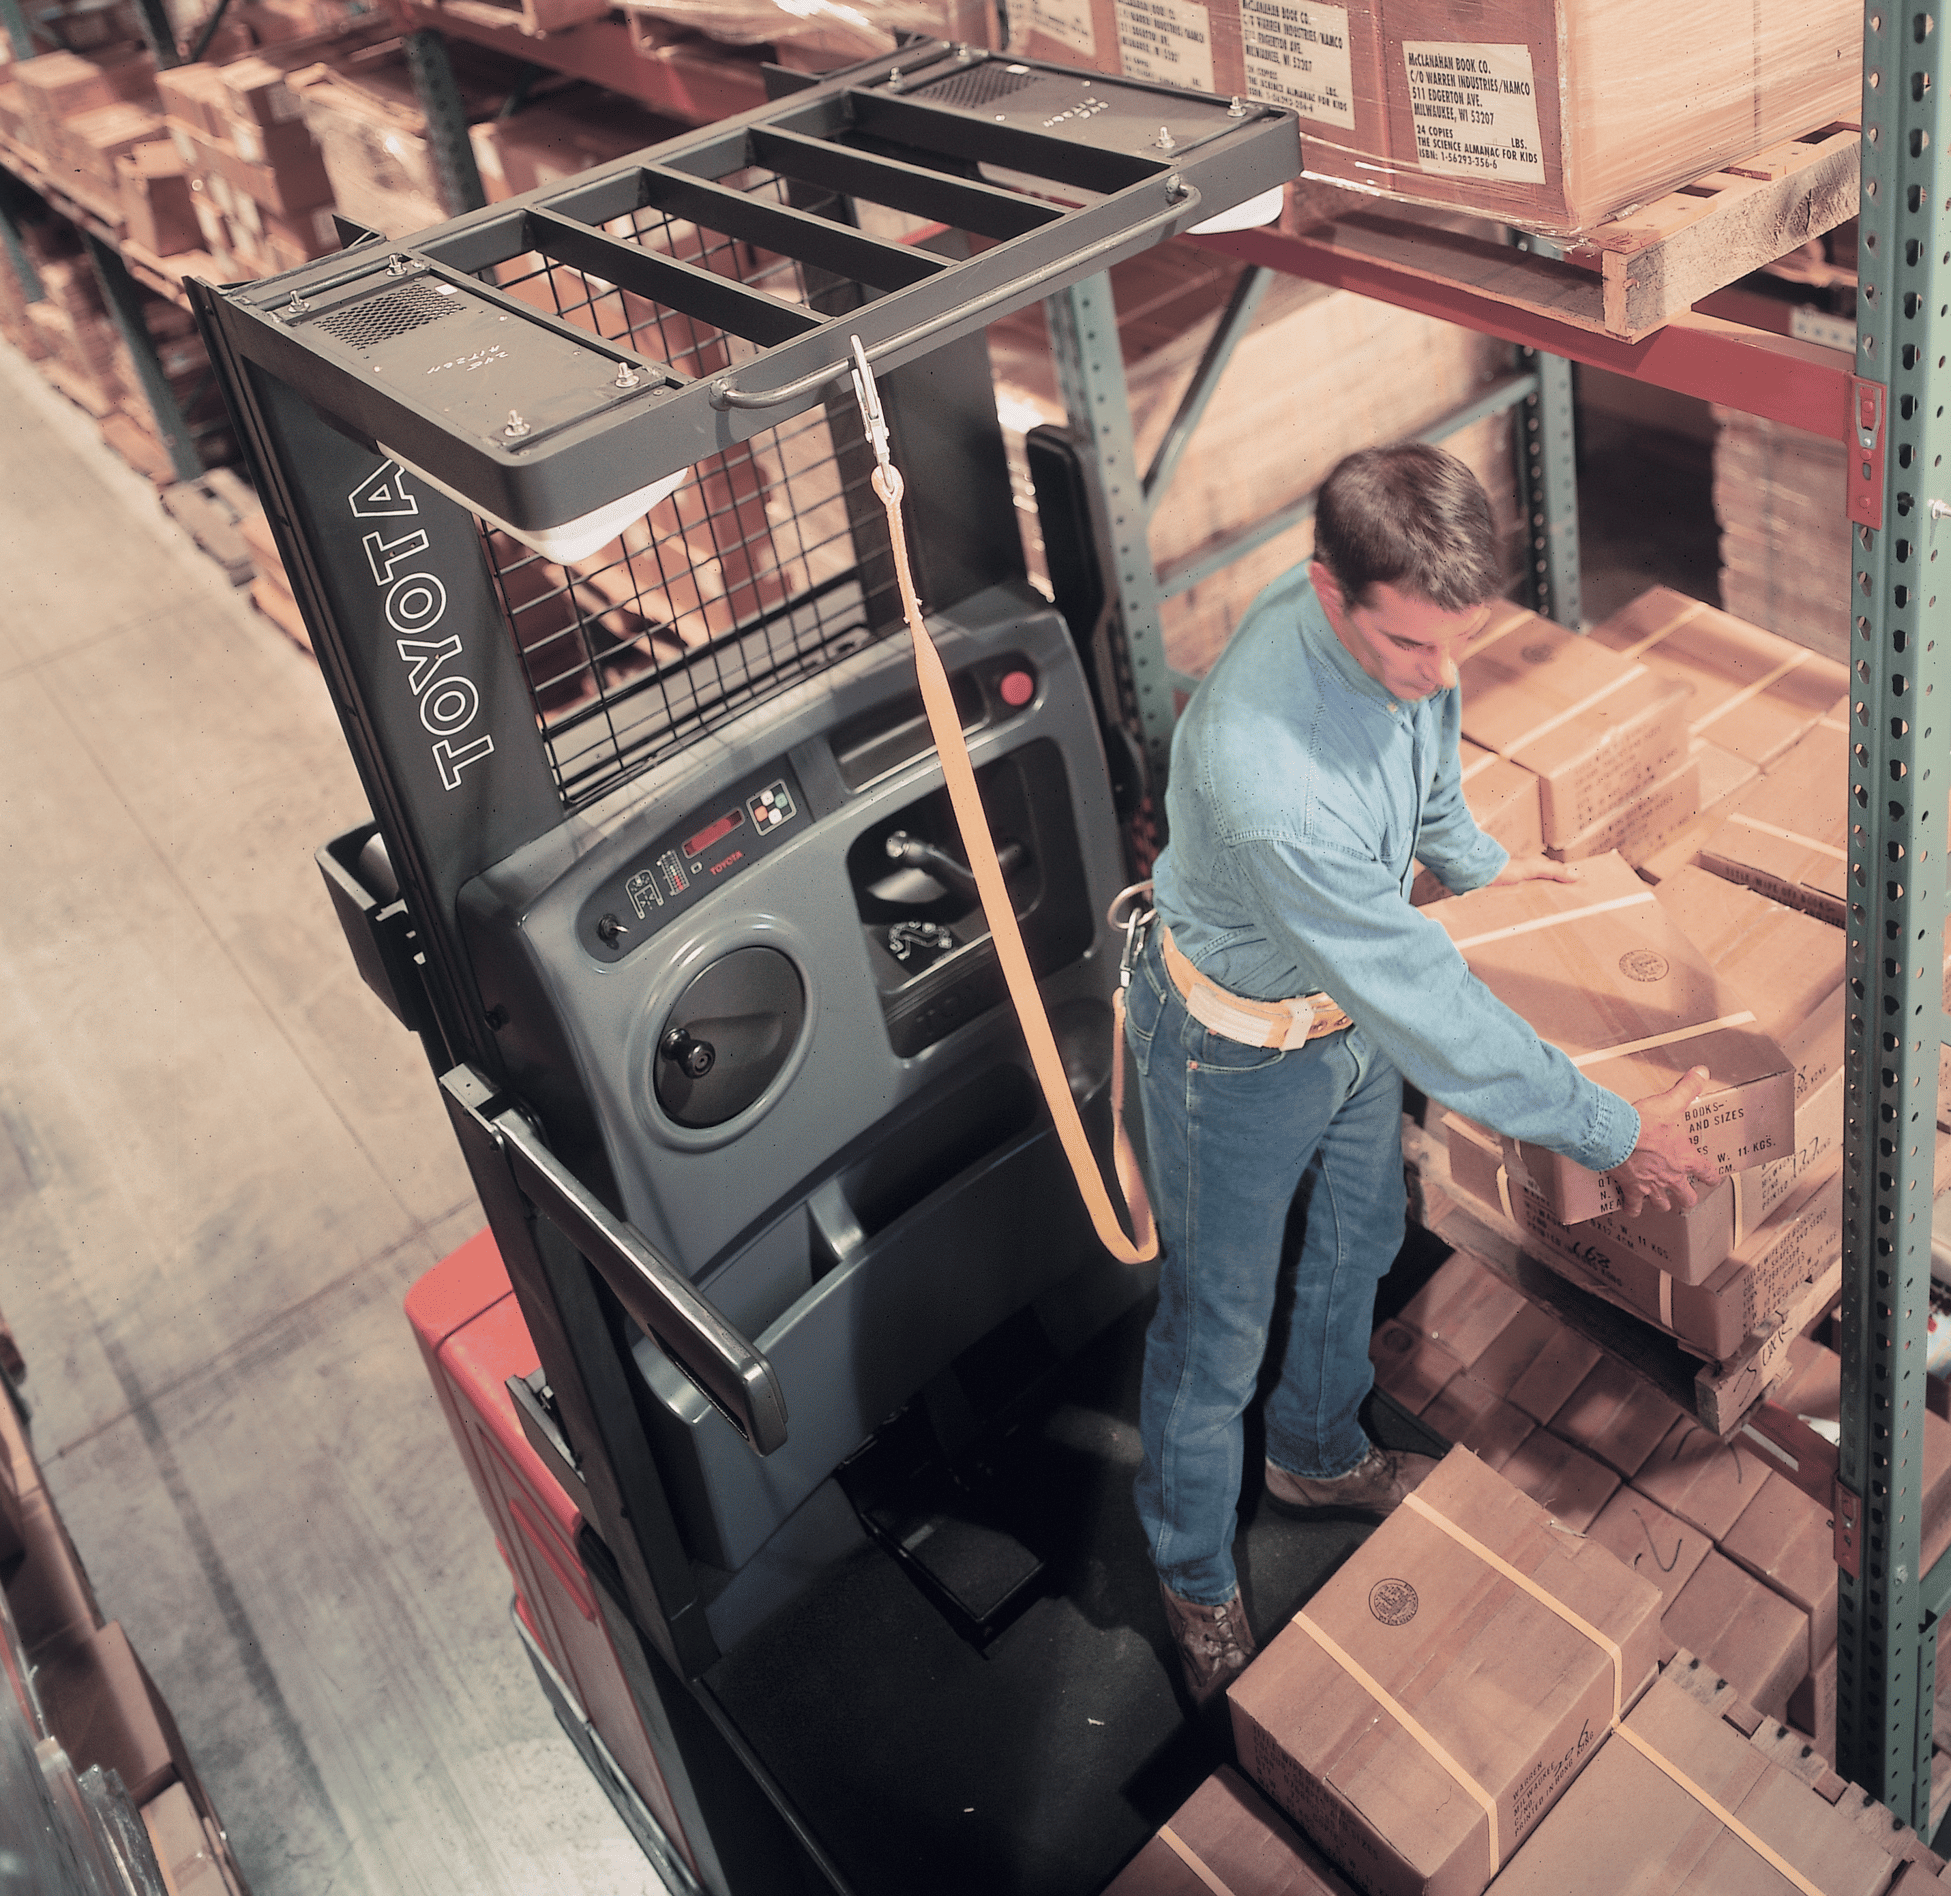 Toyota's 7-Series Order Picker forklift in action